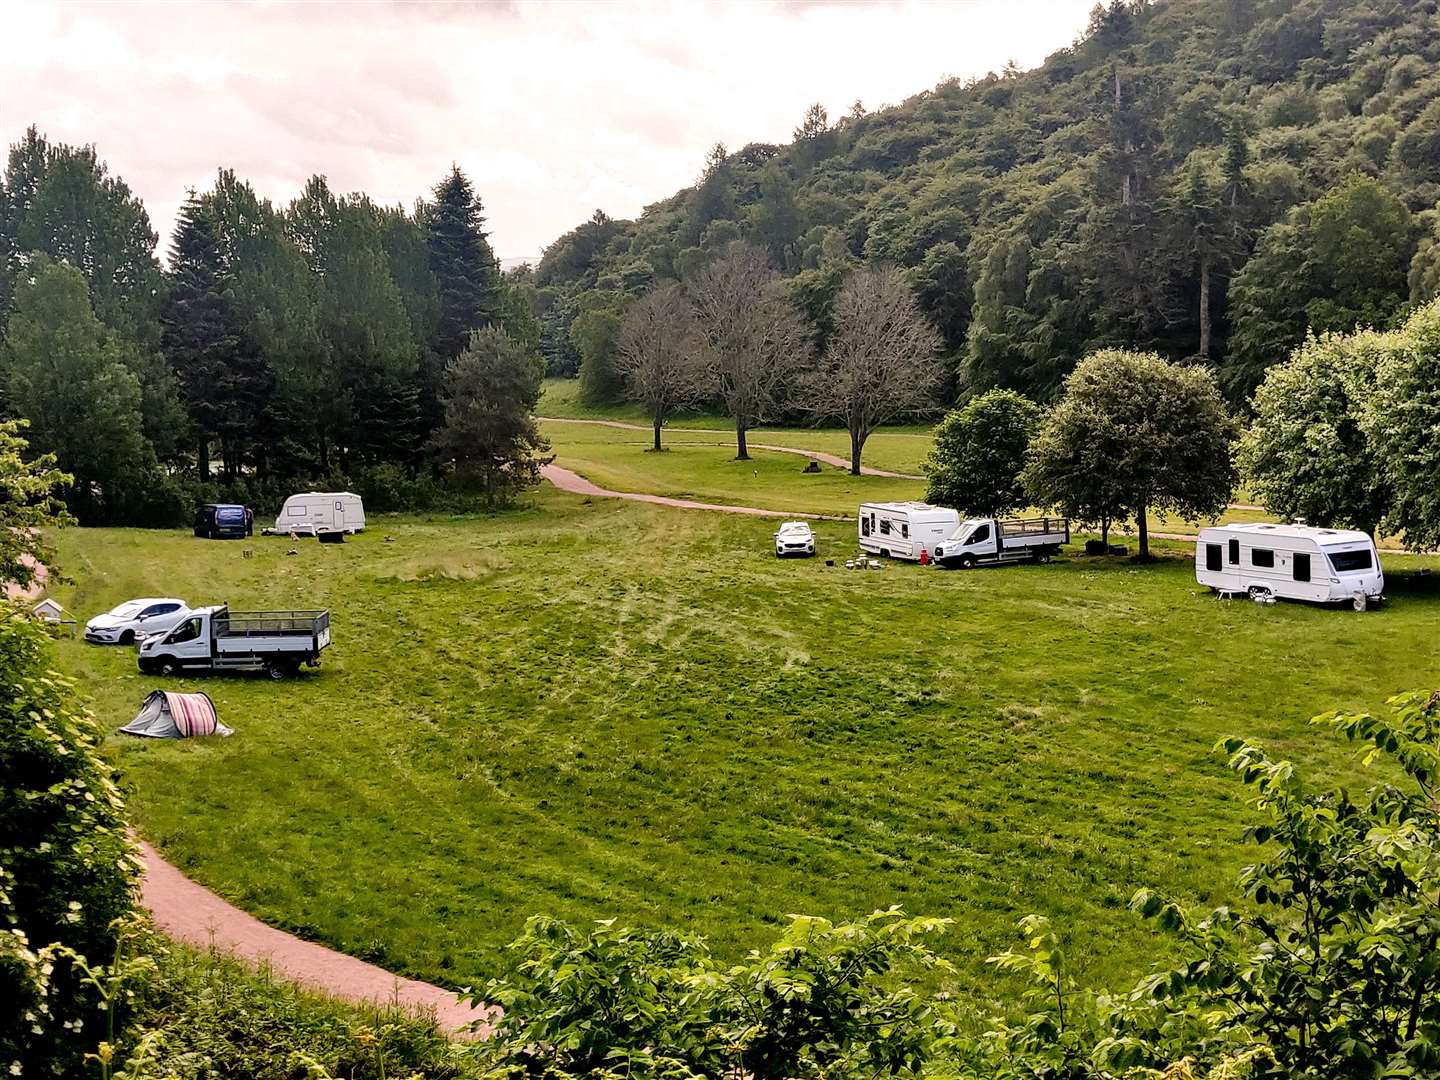 The Travellers' camp in Torvean Park. Picture: James Mackenzie